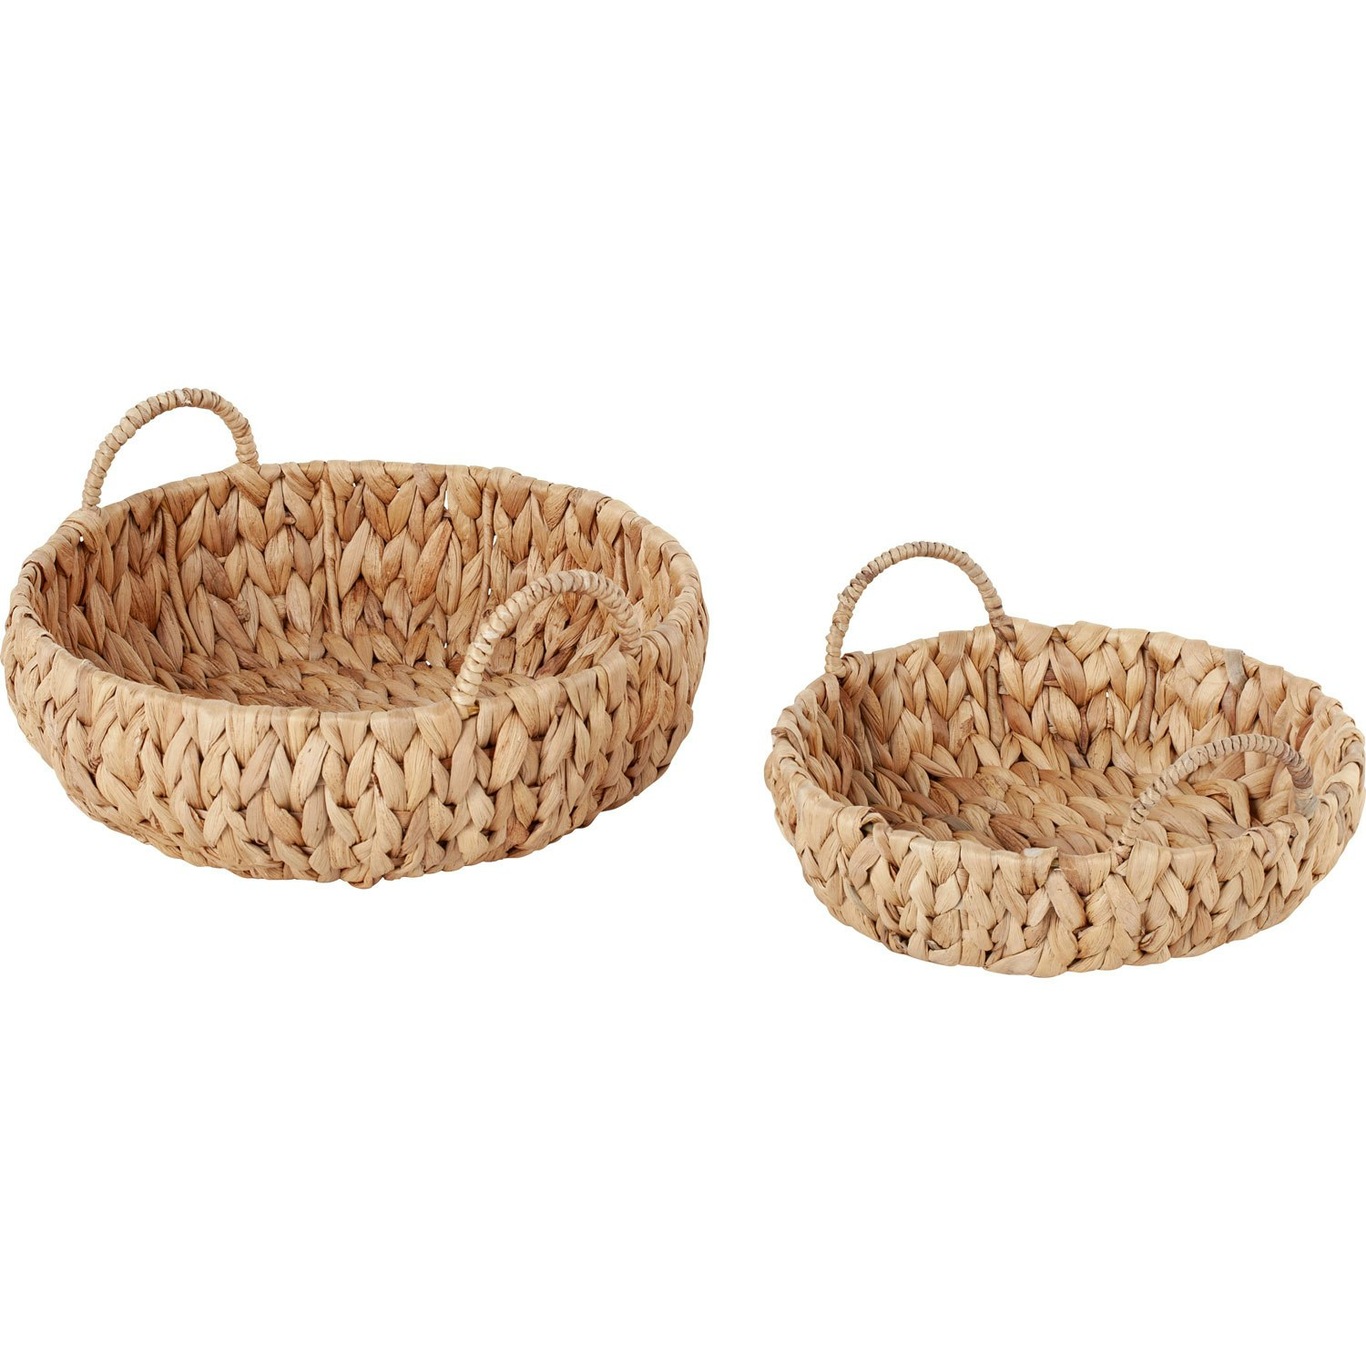 Lily Tray With Handles 2-pack